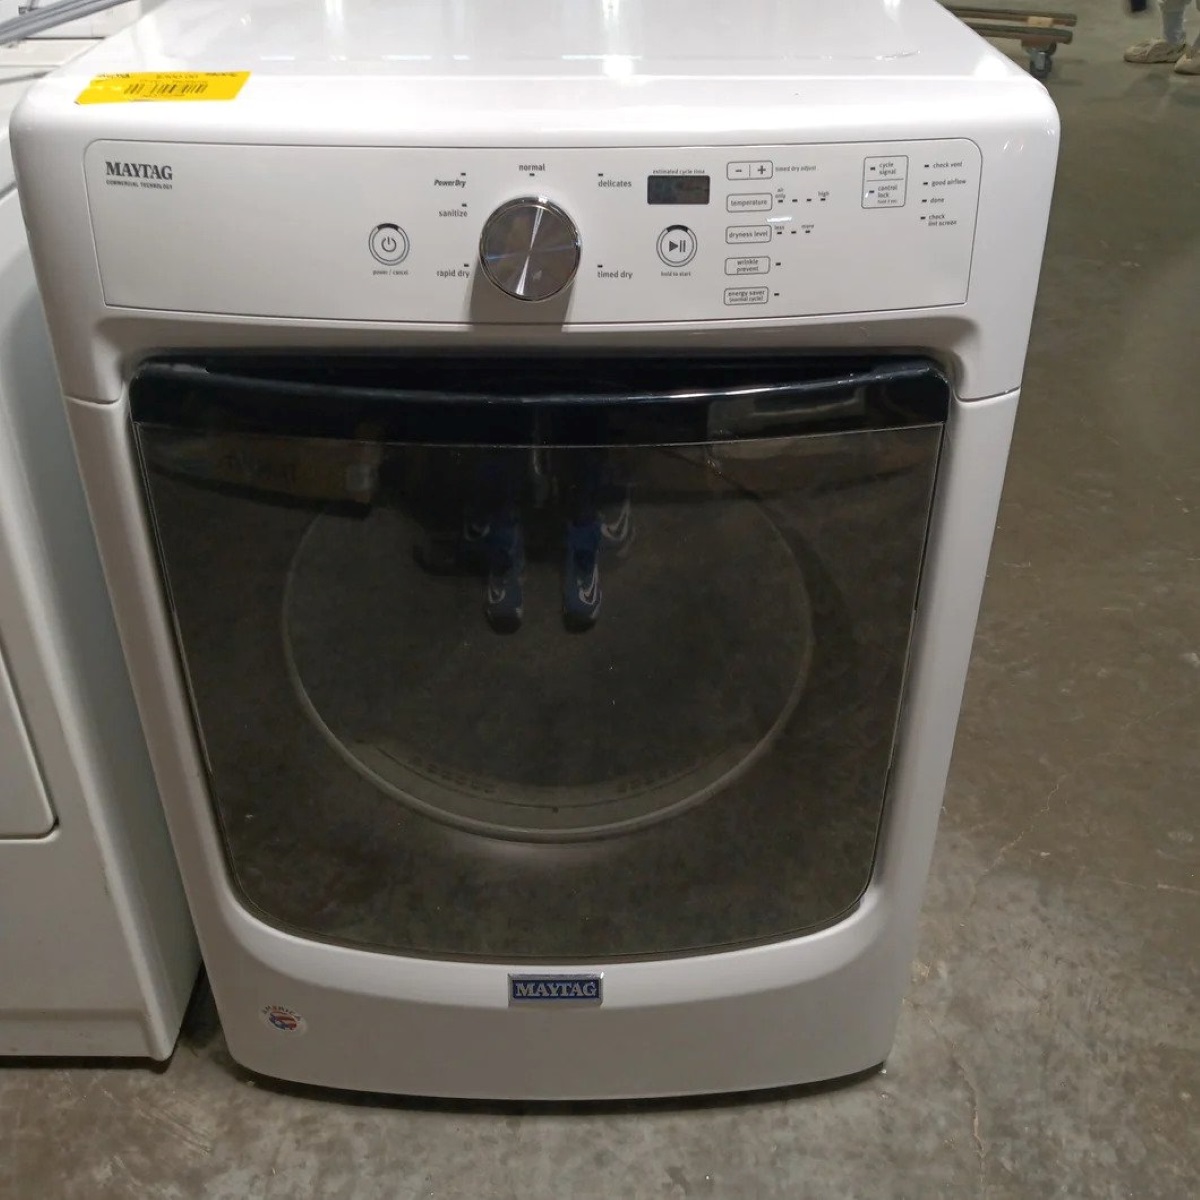 How To Fix The Error Code F02 For Maytag Dryer